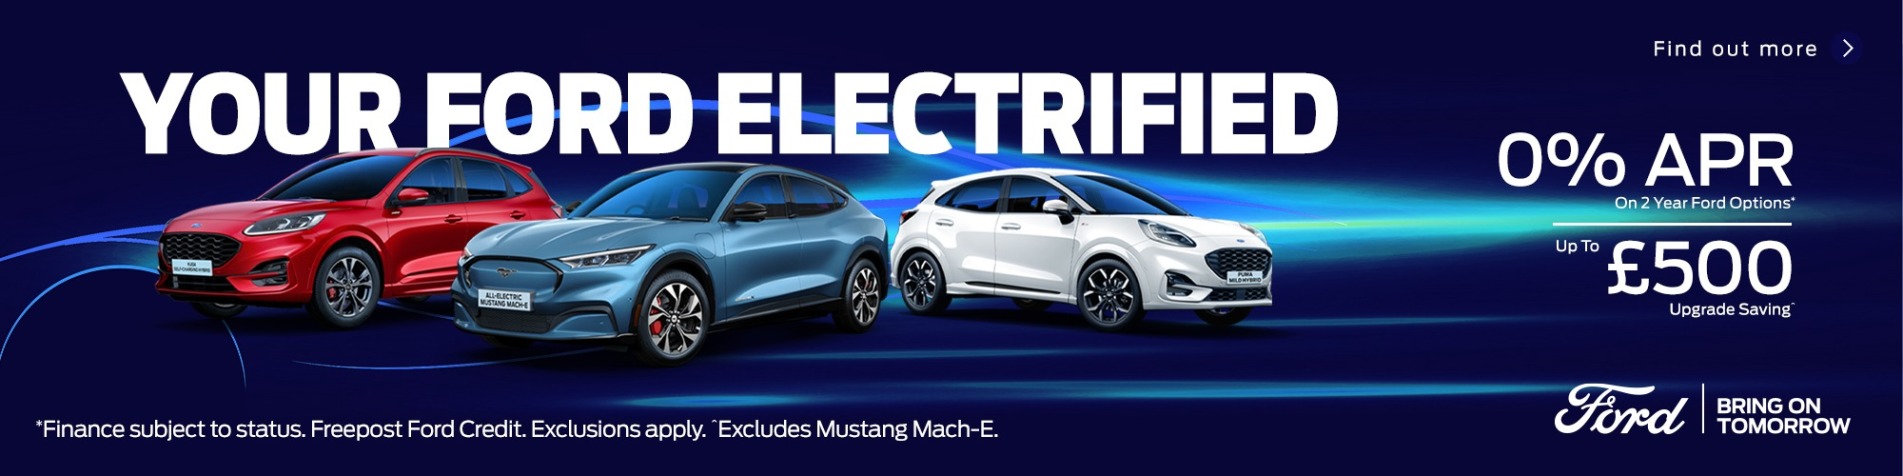 Your Ford, Electrified